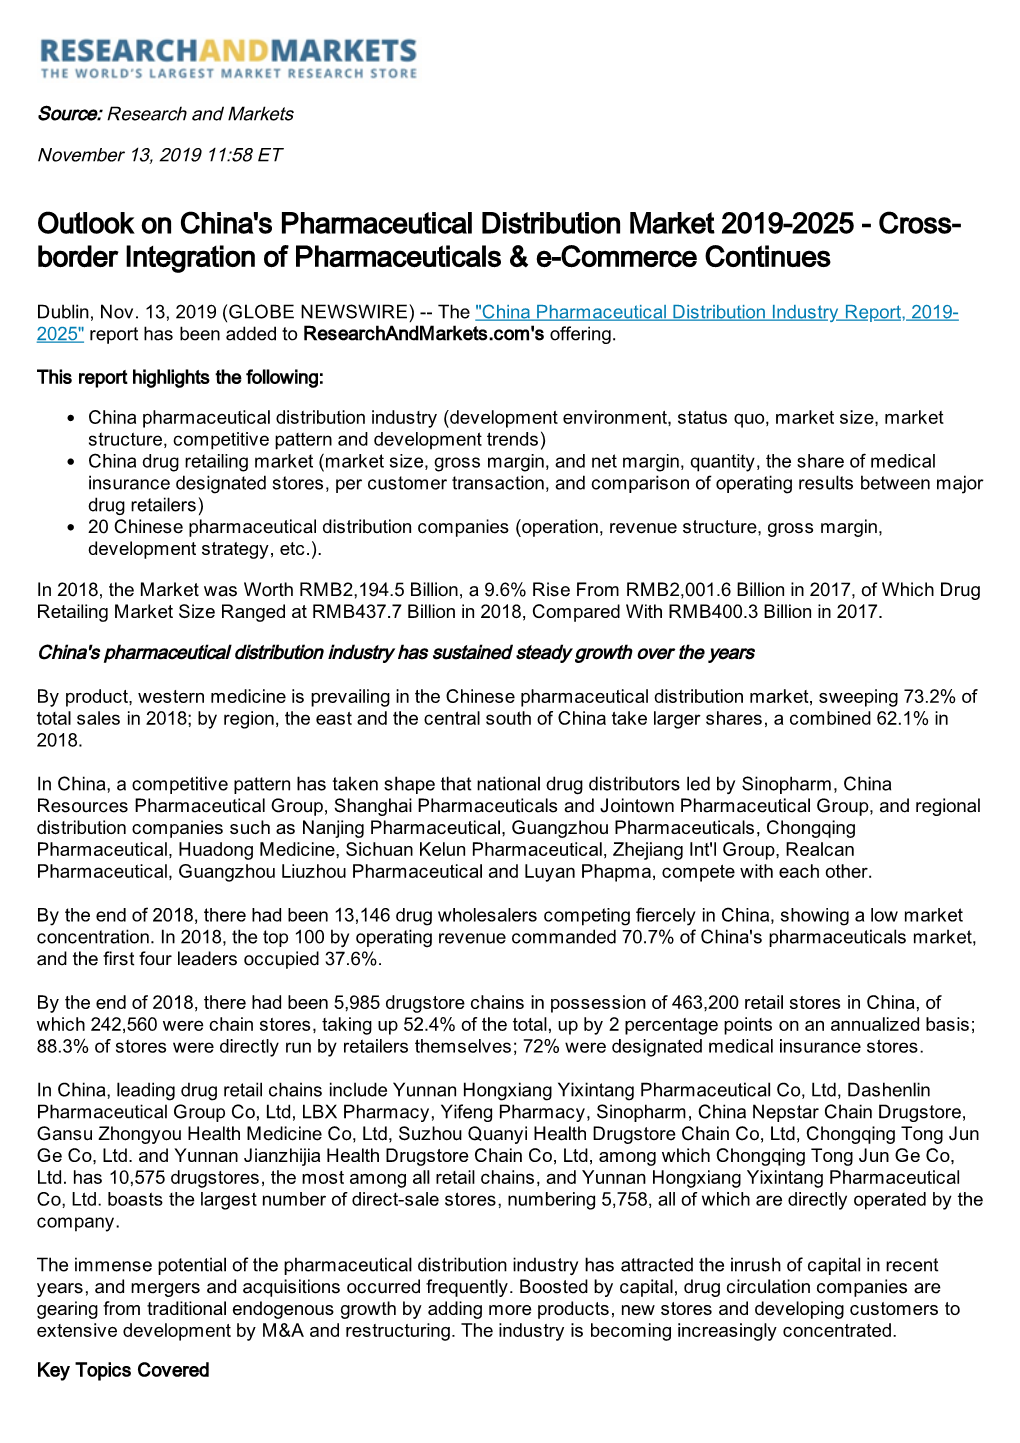 Outlook on China's Pharmaceutical Distribution Market 2019-2025 - Cross- Border Integration of Pharmaceuticals & E-Commerce Continues